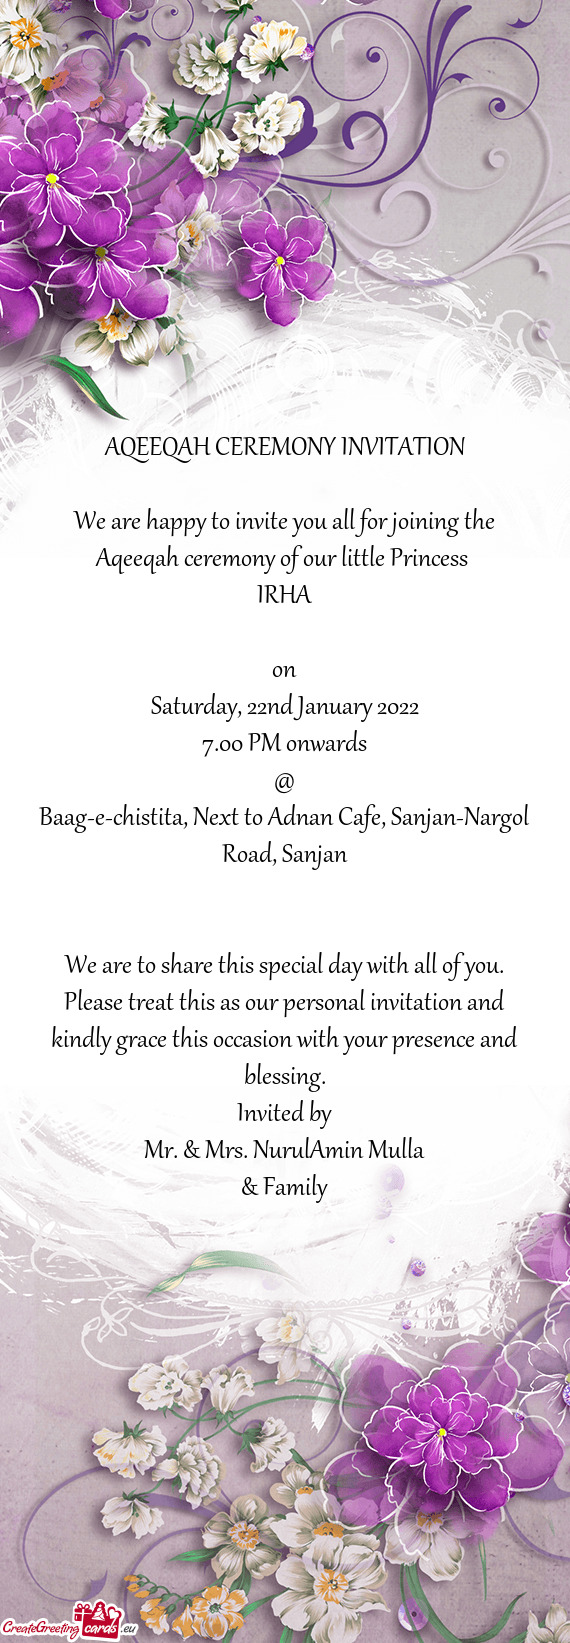 We are happy to invite you all for joining the Aqeeqah ceremony of our little Princess